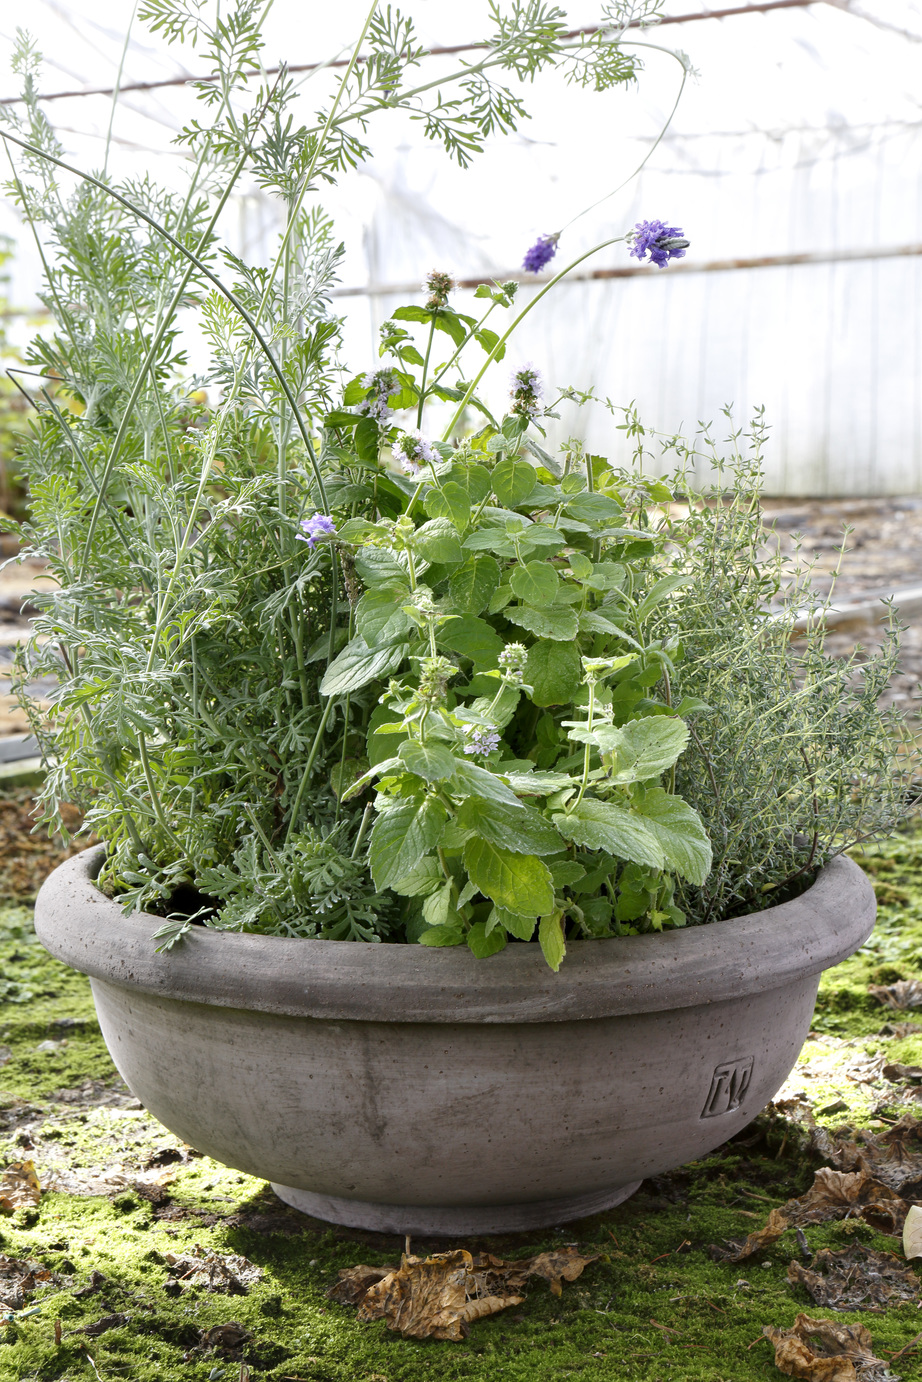 Low raw grey pot with herbs.